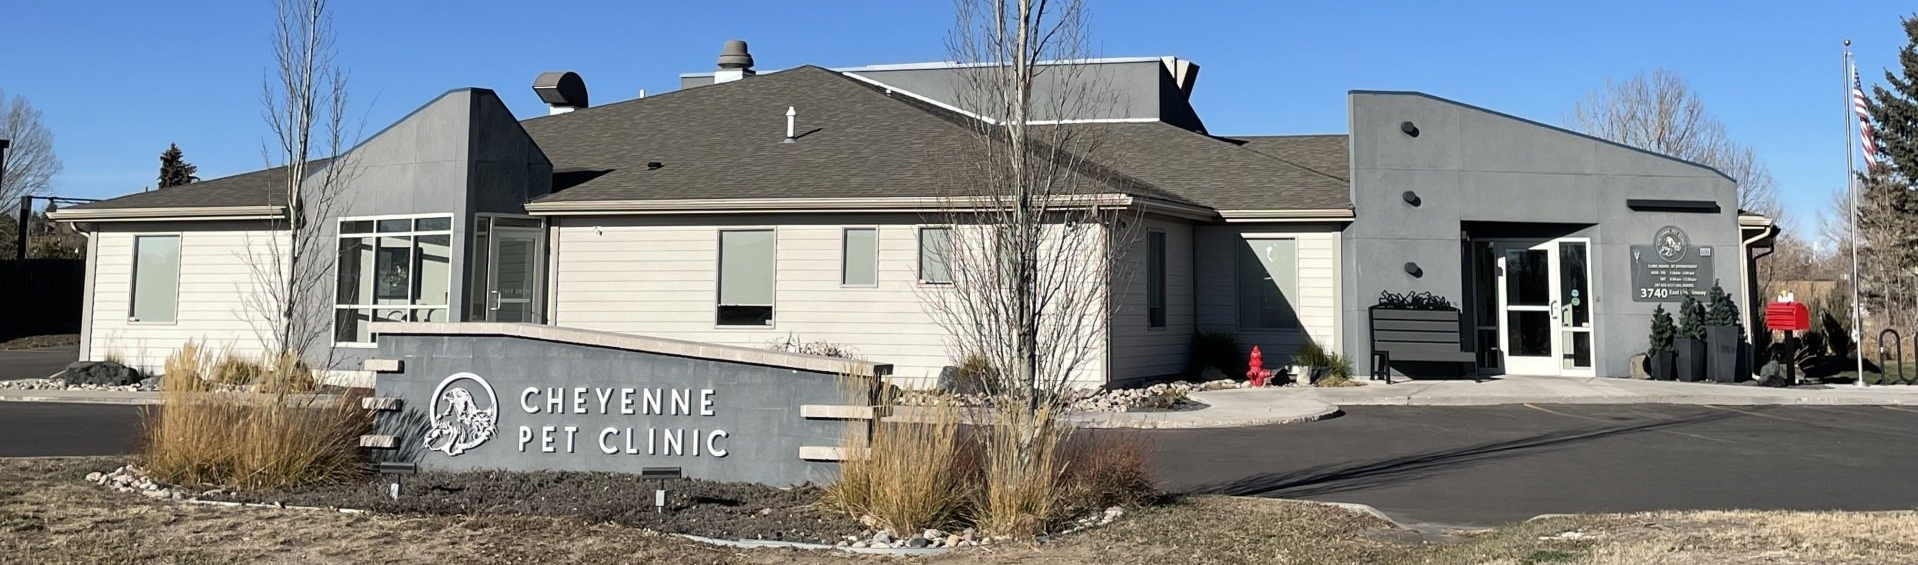 Cheyenne Pet Clinic building with the sign in front of it.